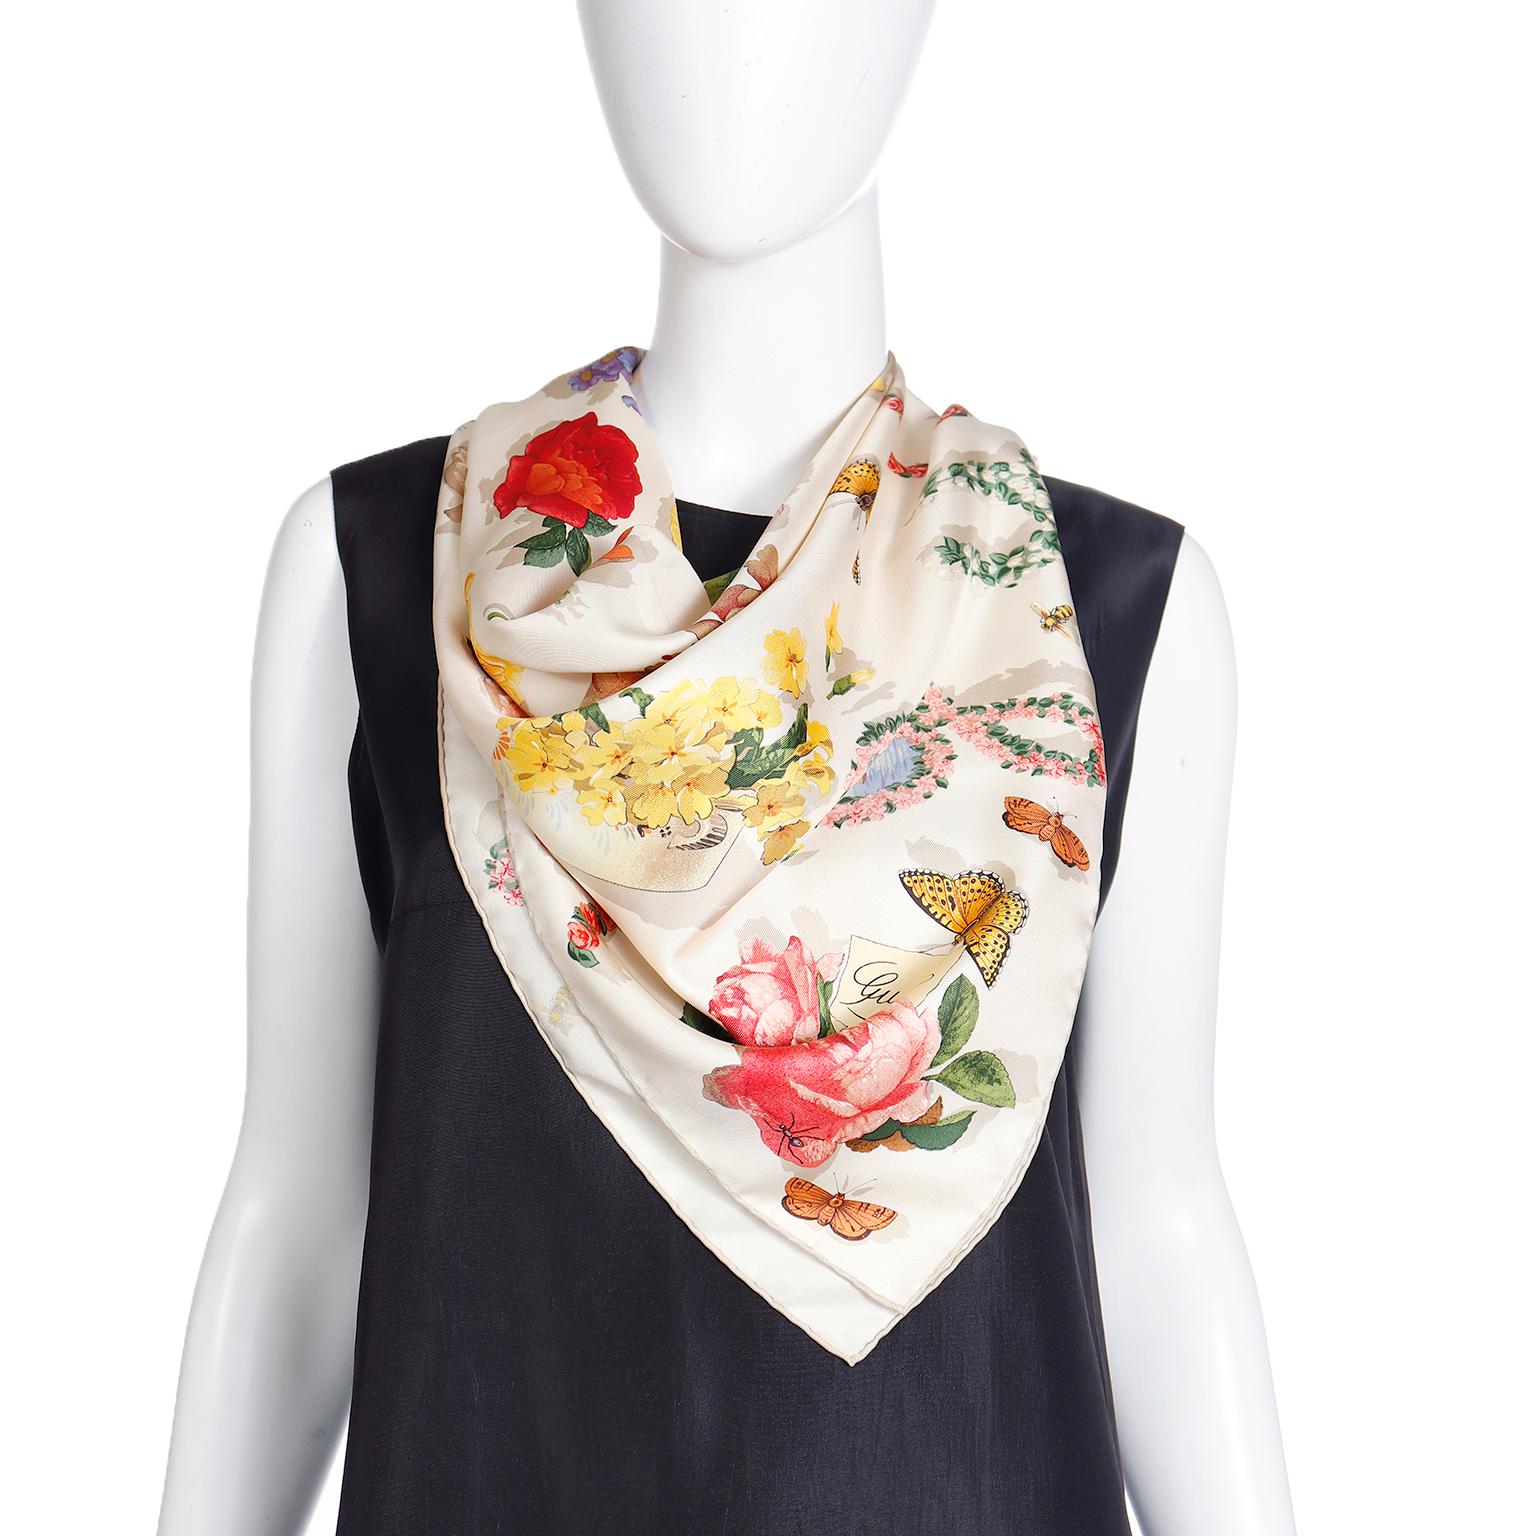 The gorgeous Gucci silk scarf is in a tranquil light beige with taupe hand rolled edges. The whimsical print features an ensemble of butterflies, bees, insects, and pretty flowers and leaves, each rendered with unique shadowing effects. The shades,